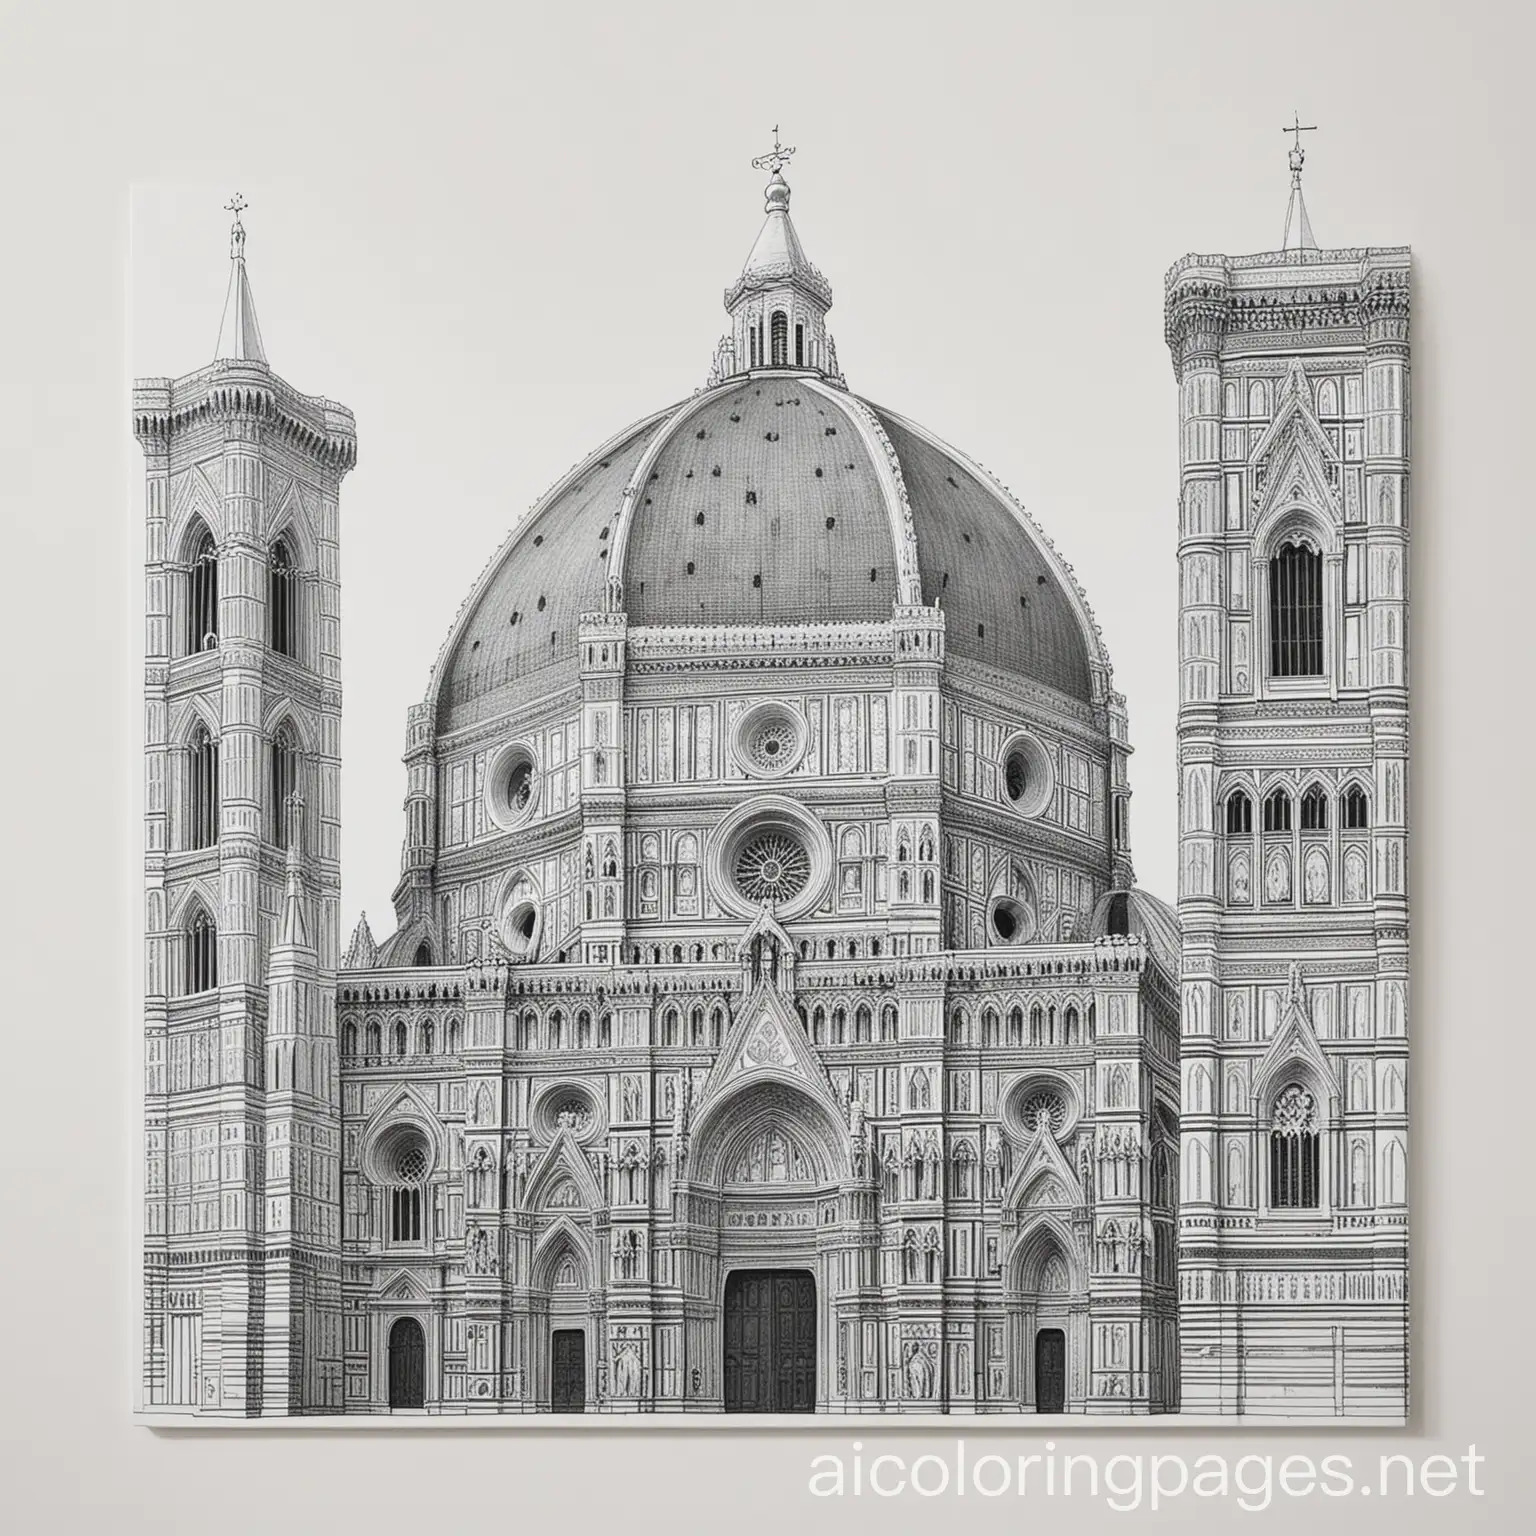 Duomo-Florence-Italy-Grey-and-White-Coloring-Page